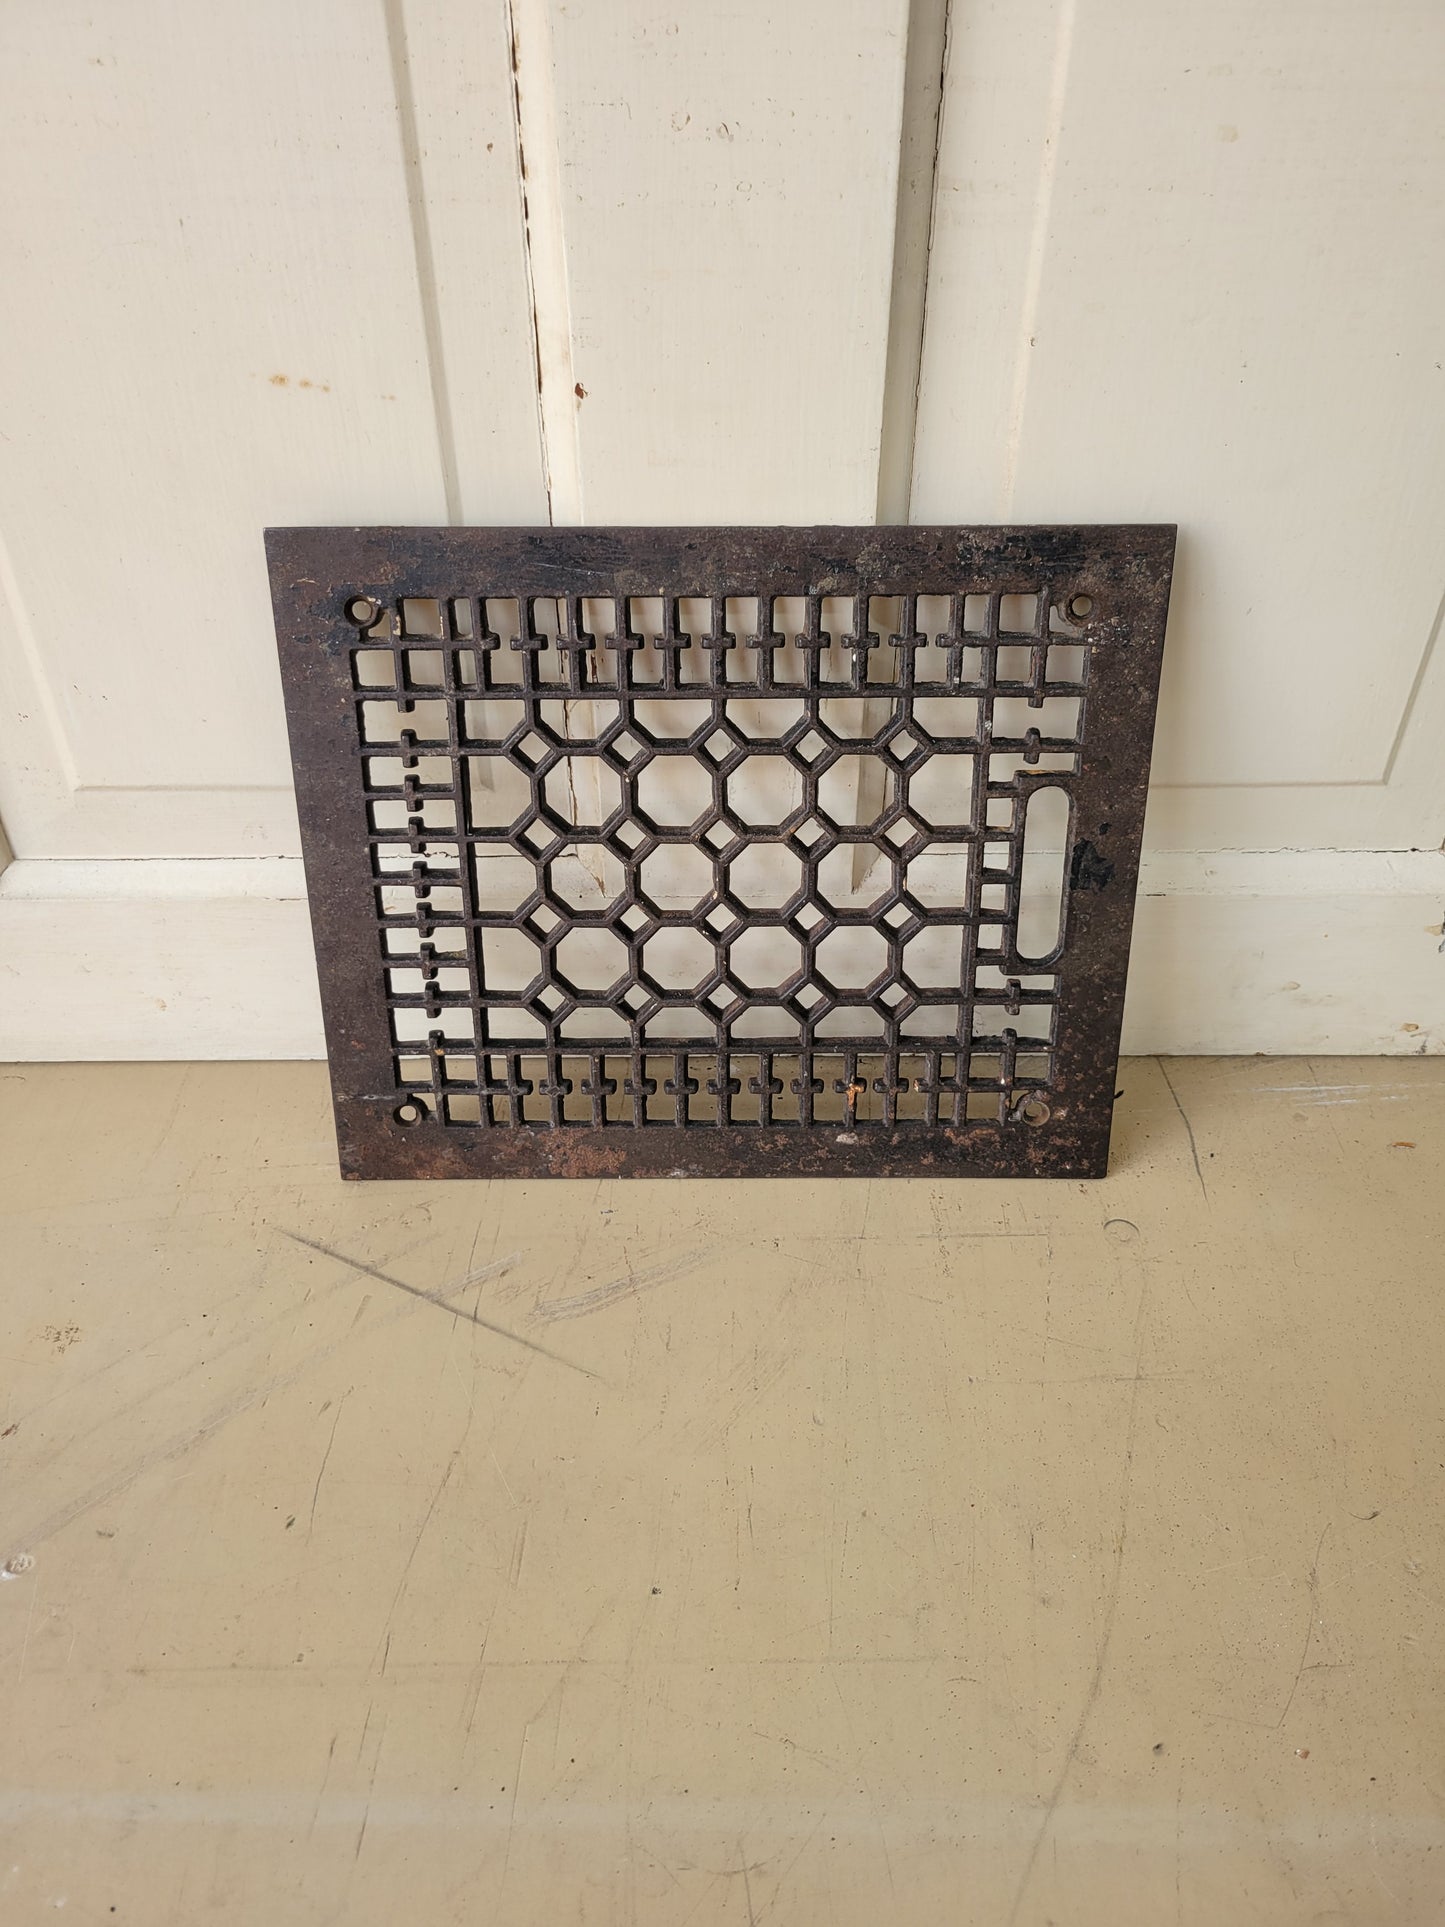 12 x 10 Fancy Antique Register Cover, Antique Cast Iron Floor Vent Cover with Dampers, #032103